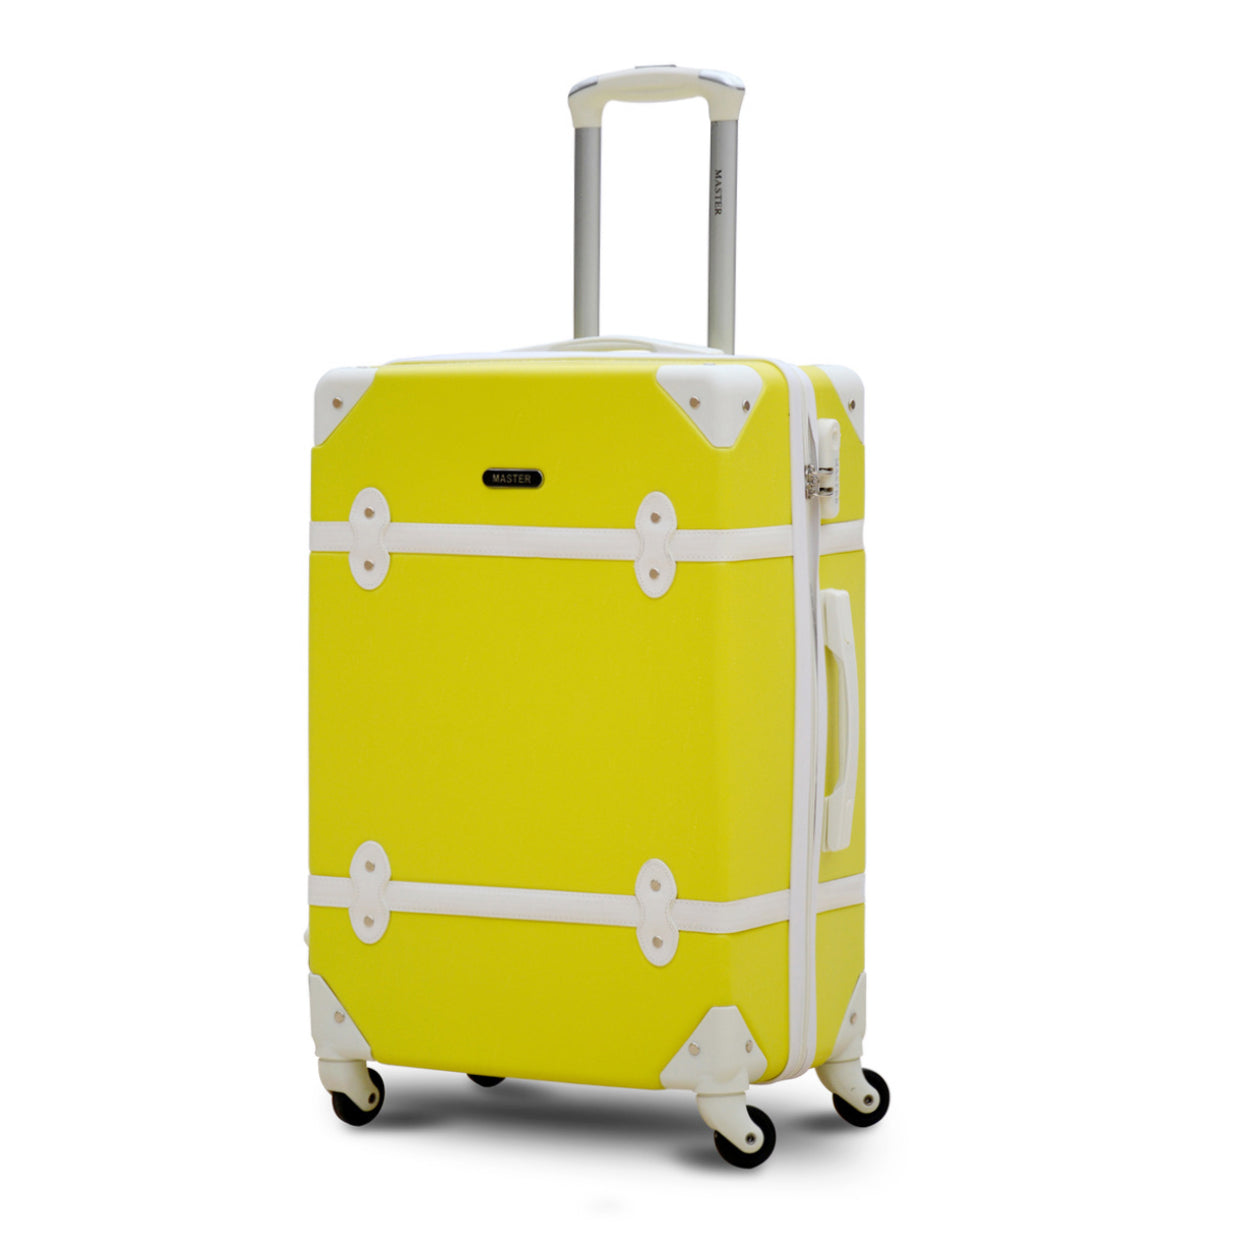 Lightweight ABS 20 Kg Luggage + Beauty Case | Hard Case Trolley Bag | Corner Guard Yellow